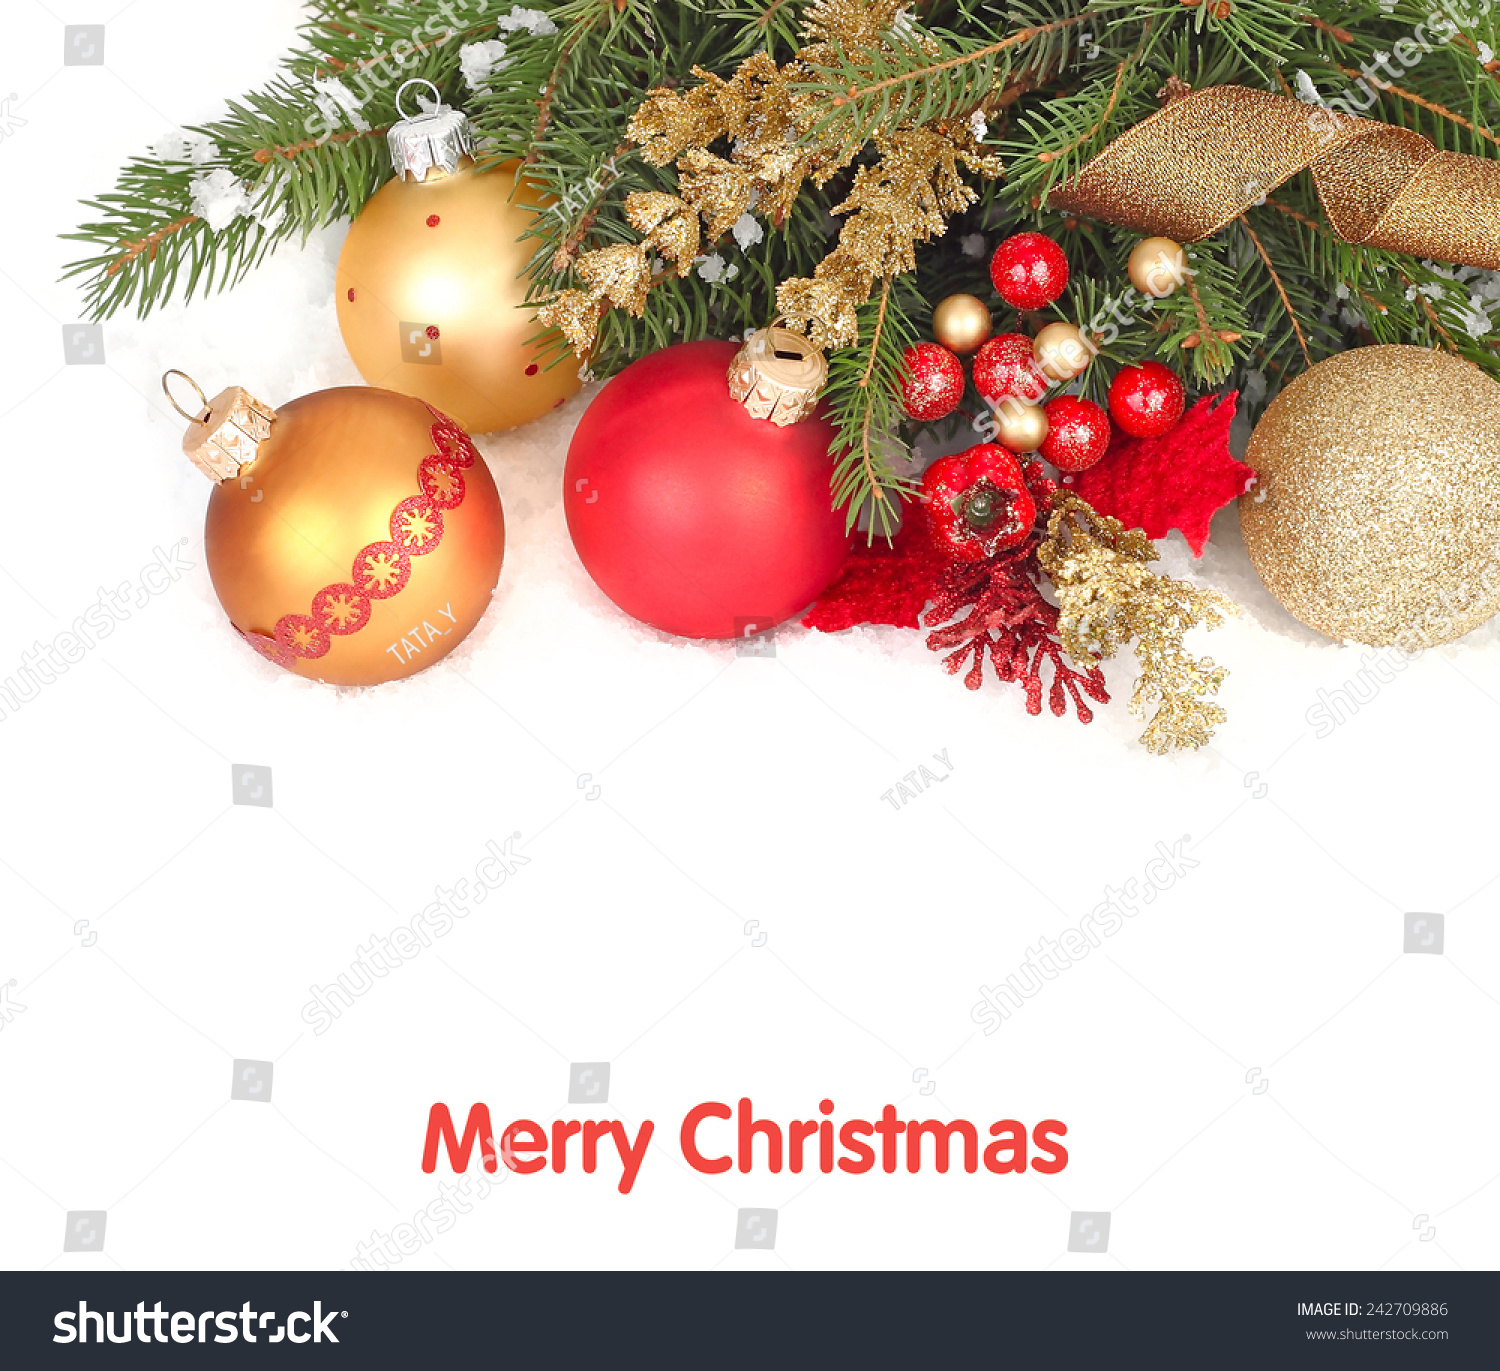 Christmas background with red and golden Christmas balls on branches of a Christmas tree. #242709886